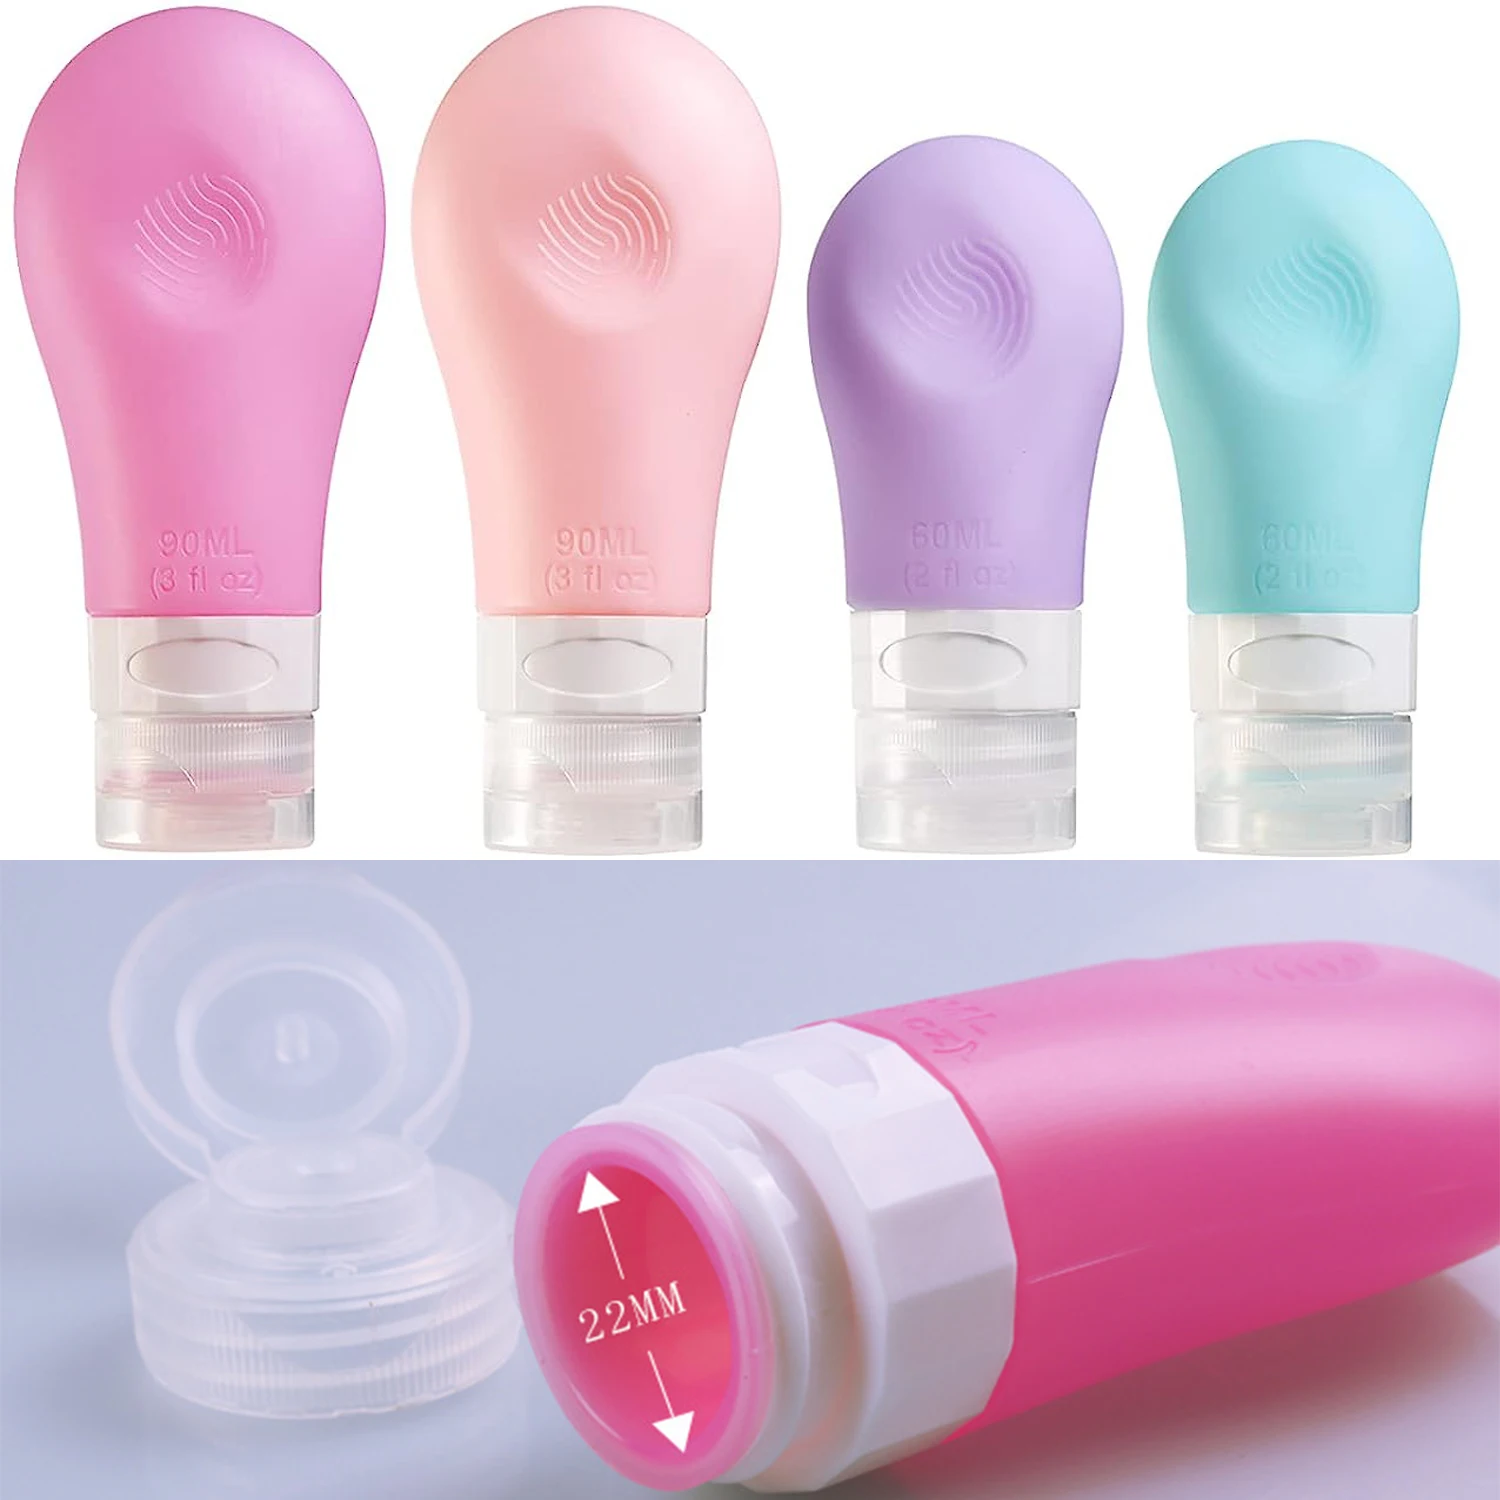 

Travel Bottles Toiletries Travel Size Refillable Portable Containers Leak Proof Silicone Squeezable Travel Accessories Shampoo